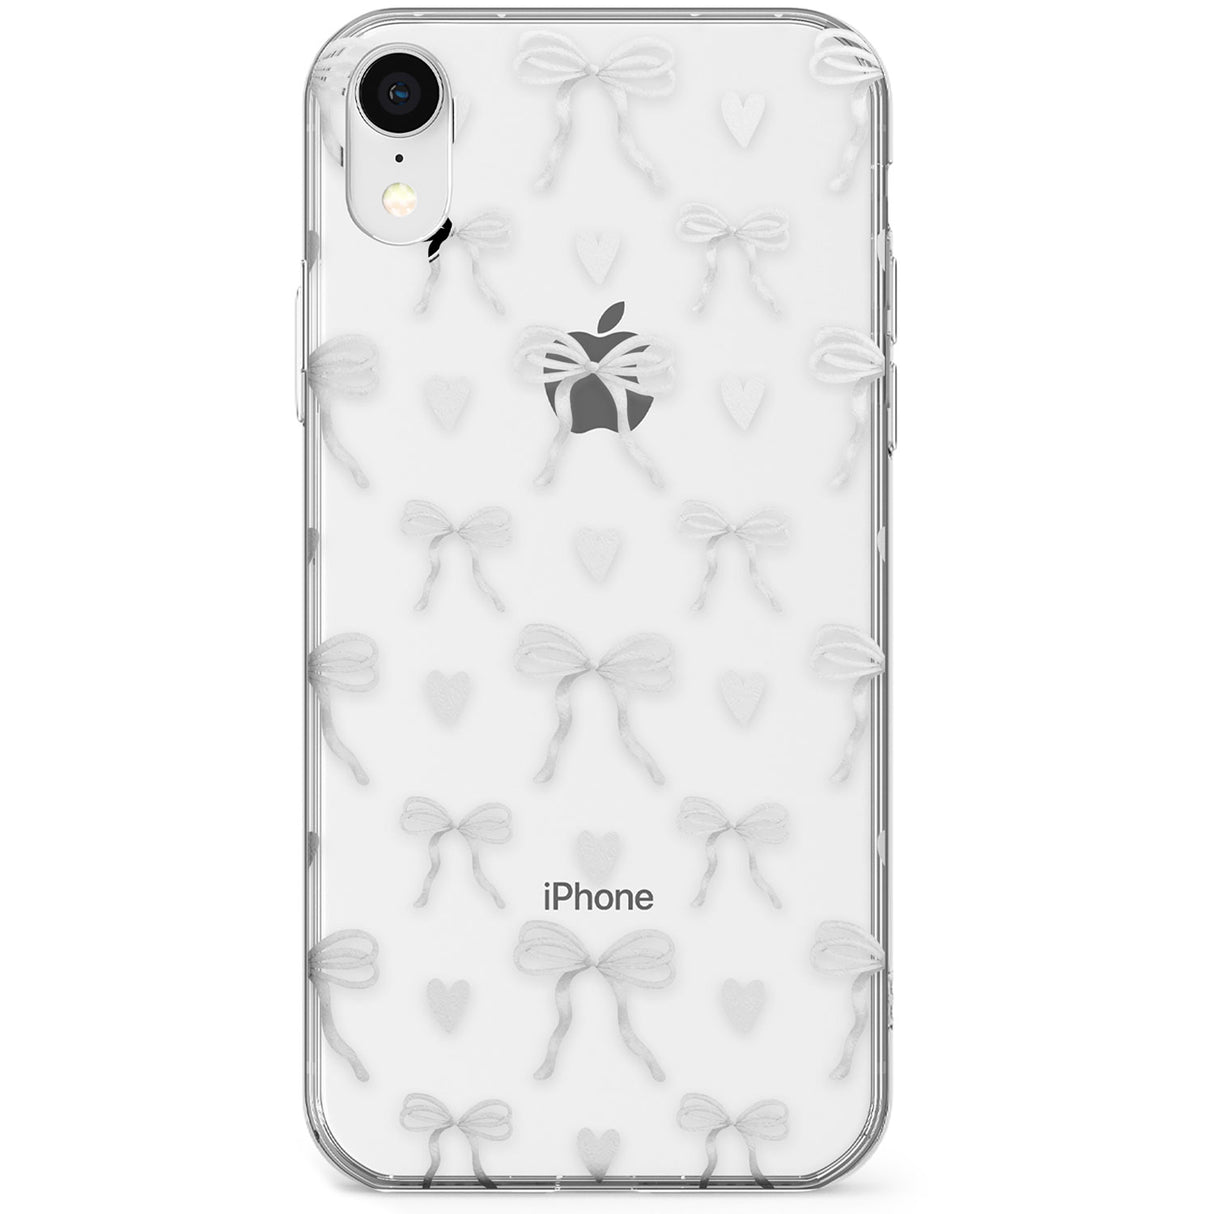 White Bows & Hearts Phone Case for iPhone X, XS Max, XR